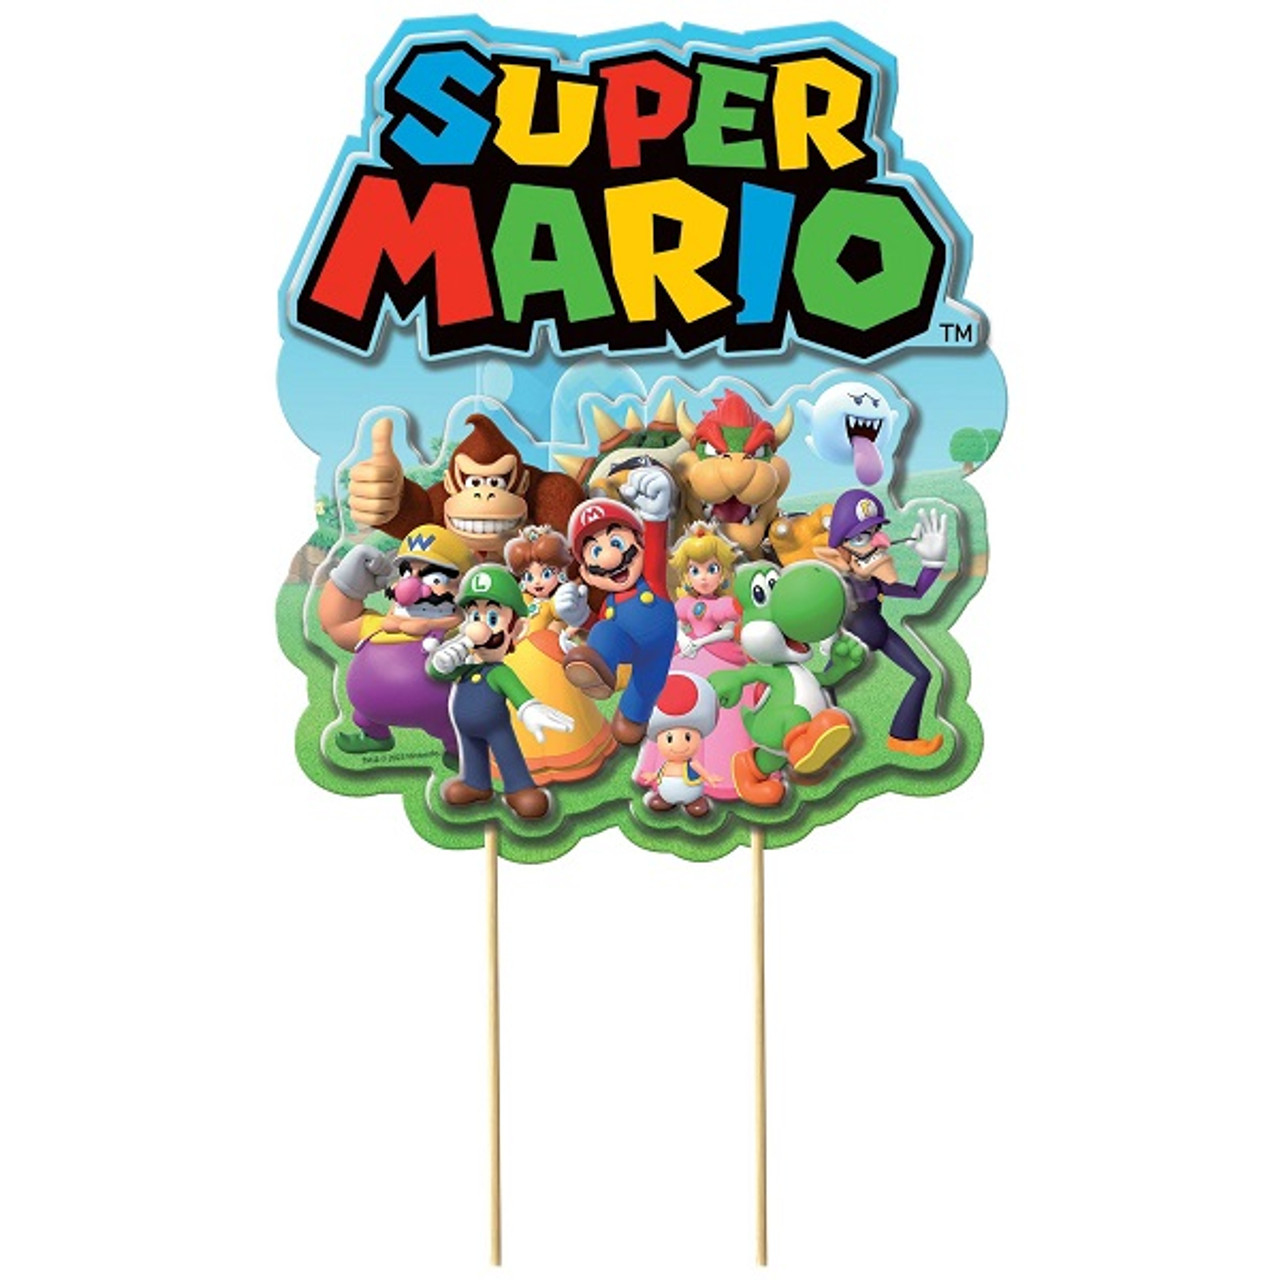 Super Mario Brothers Cake Topper - Party Time, Inc.